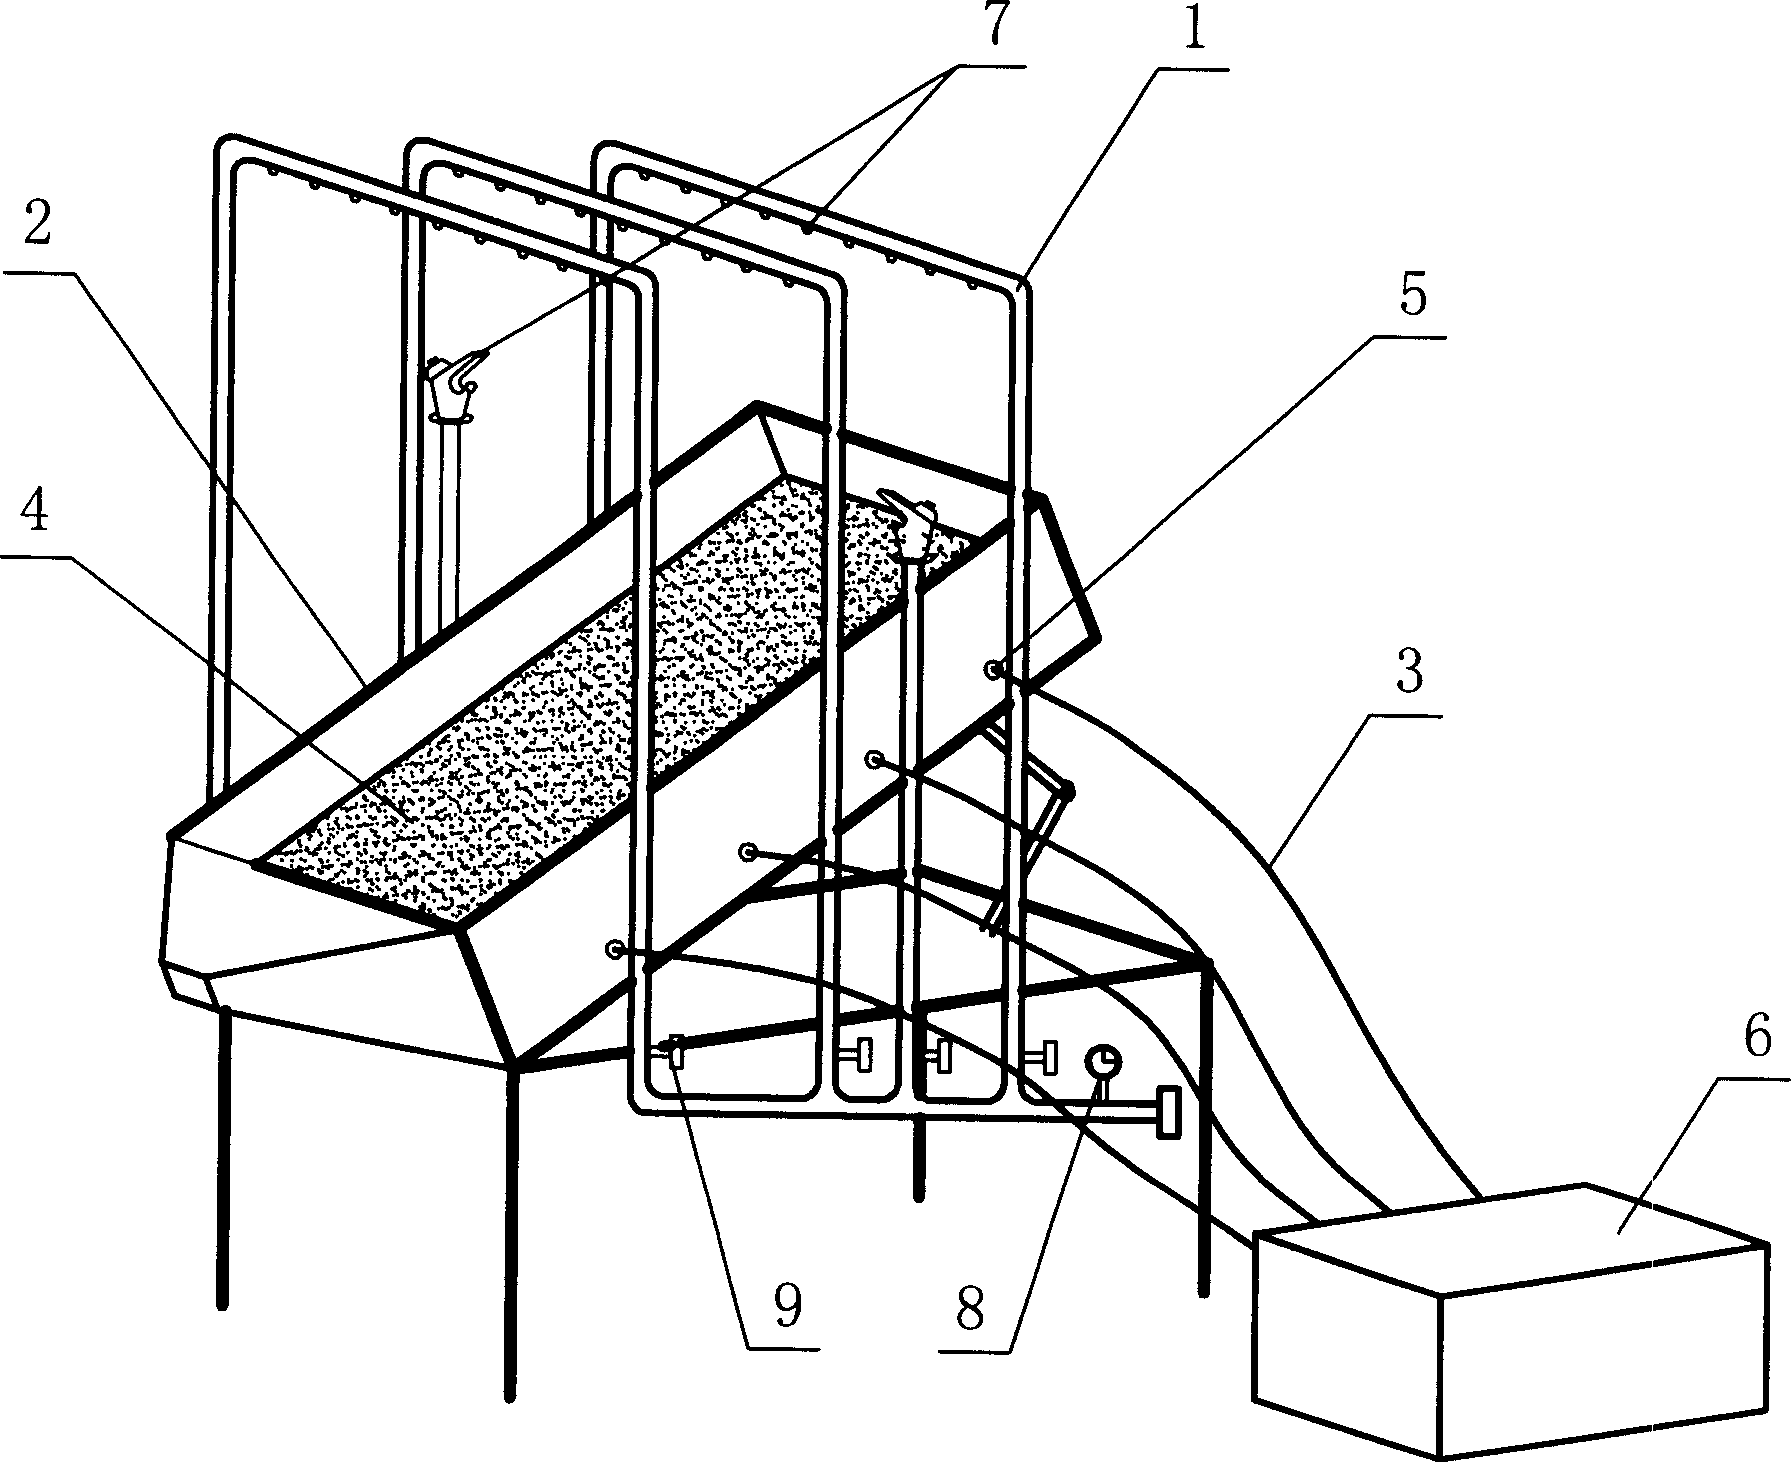 Experimental device for regulatiog and controlling rainfall and experimental method